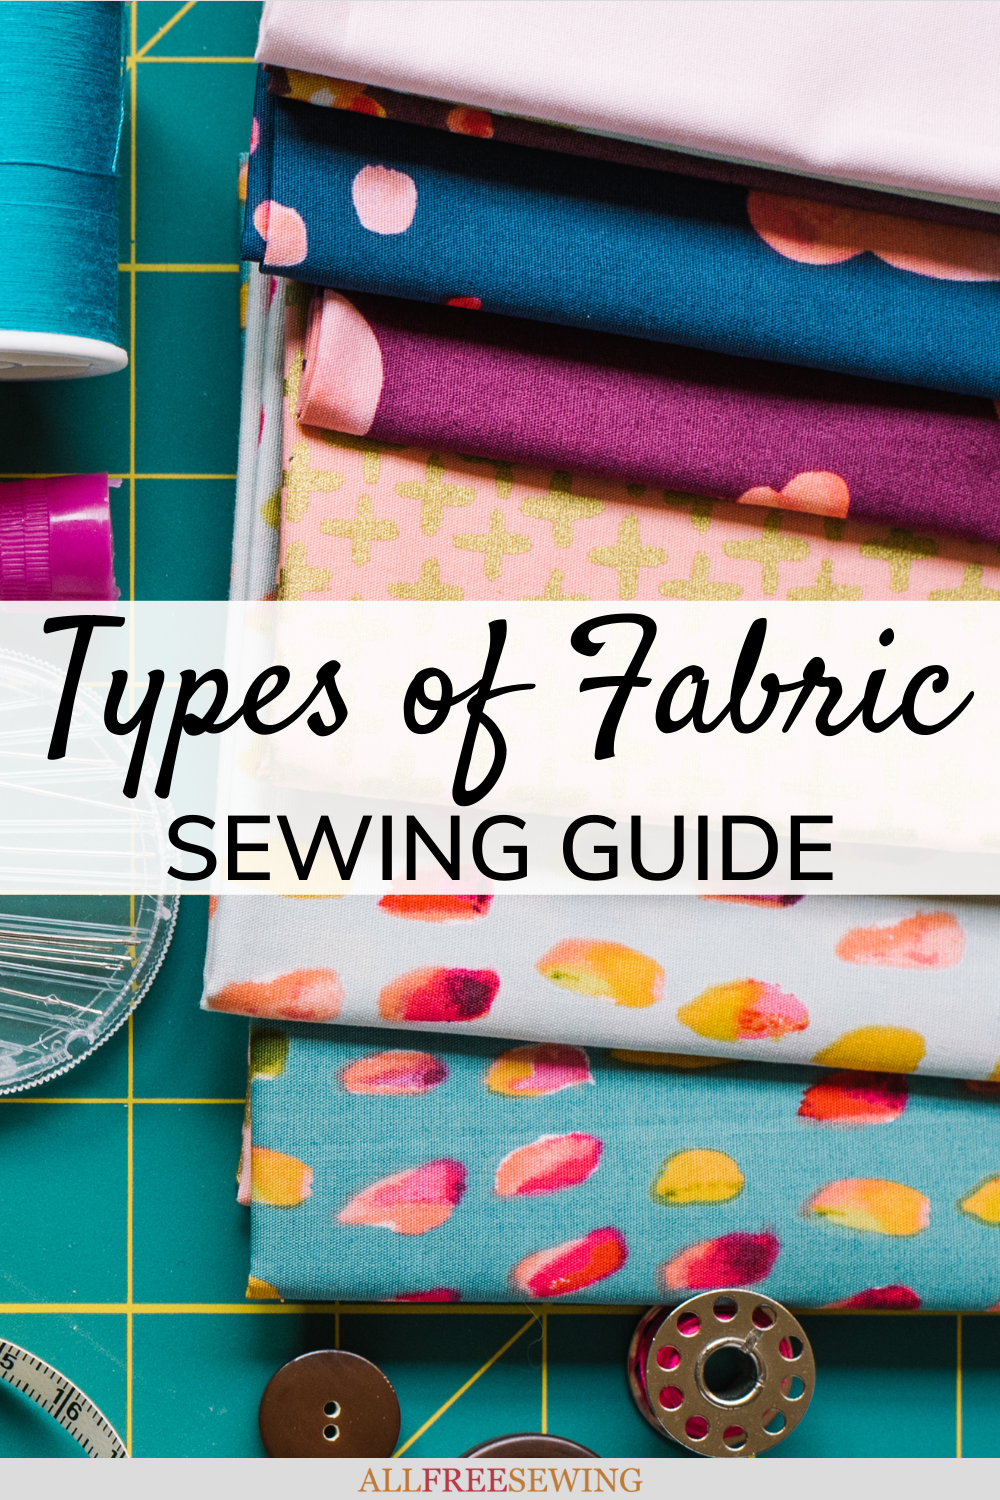 17 Types of Stretch Fabric (Full Stretchy Fabric Names List)